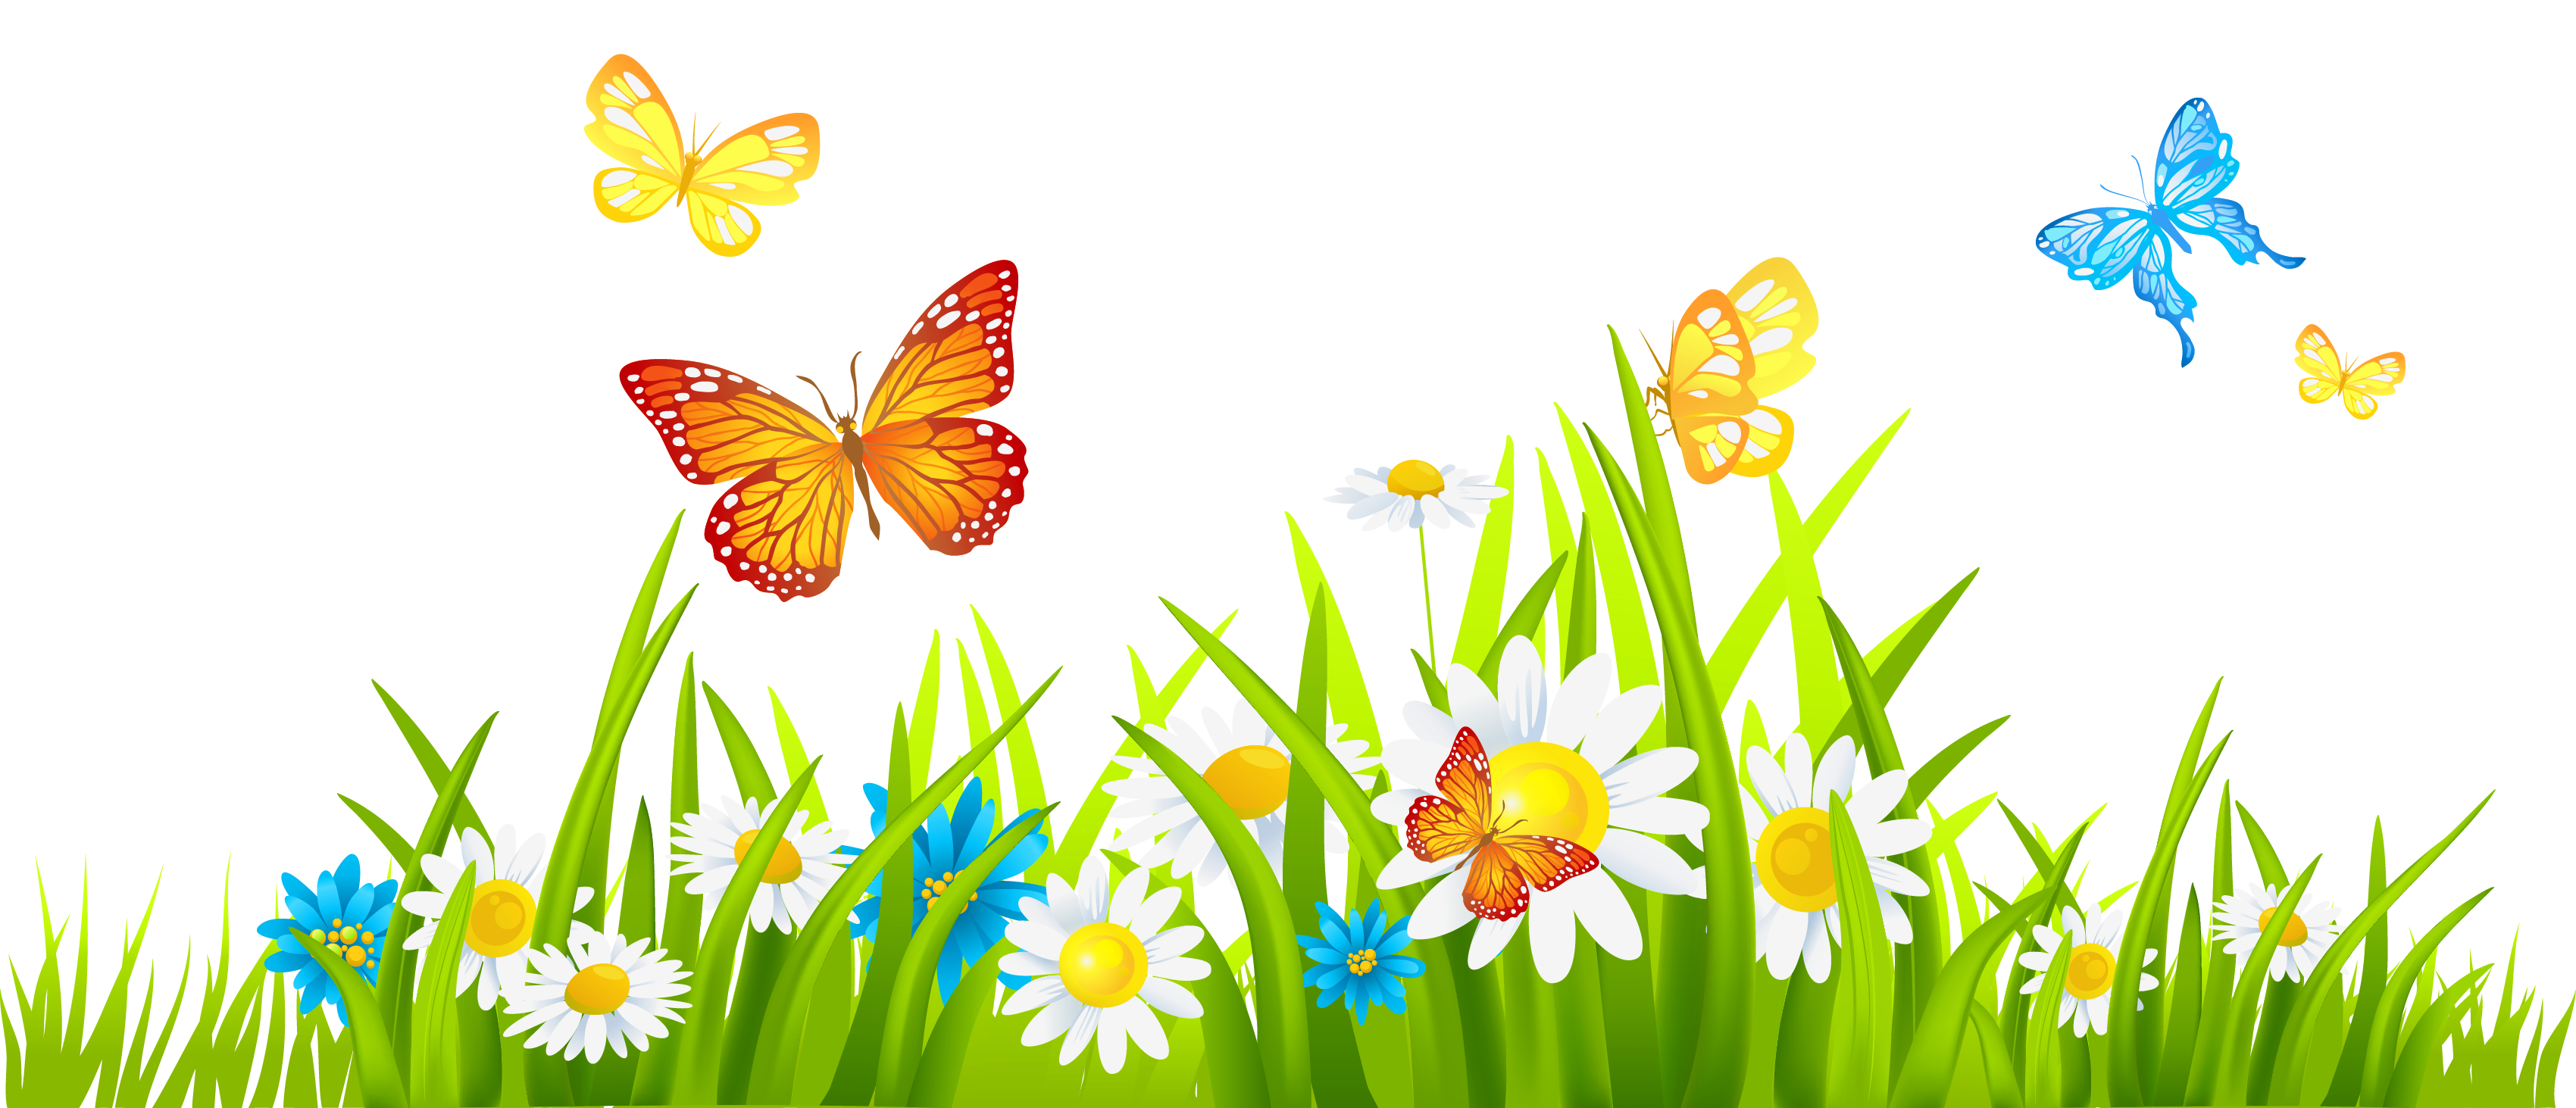 Grass and flowers clip art free clipart image clipartwiz